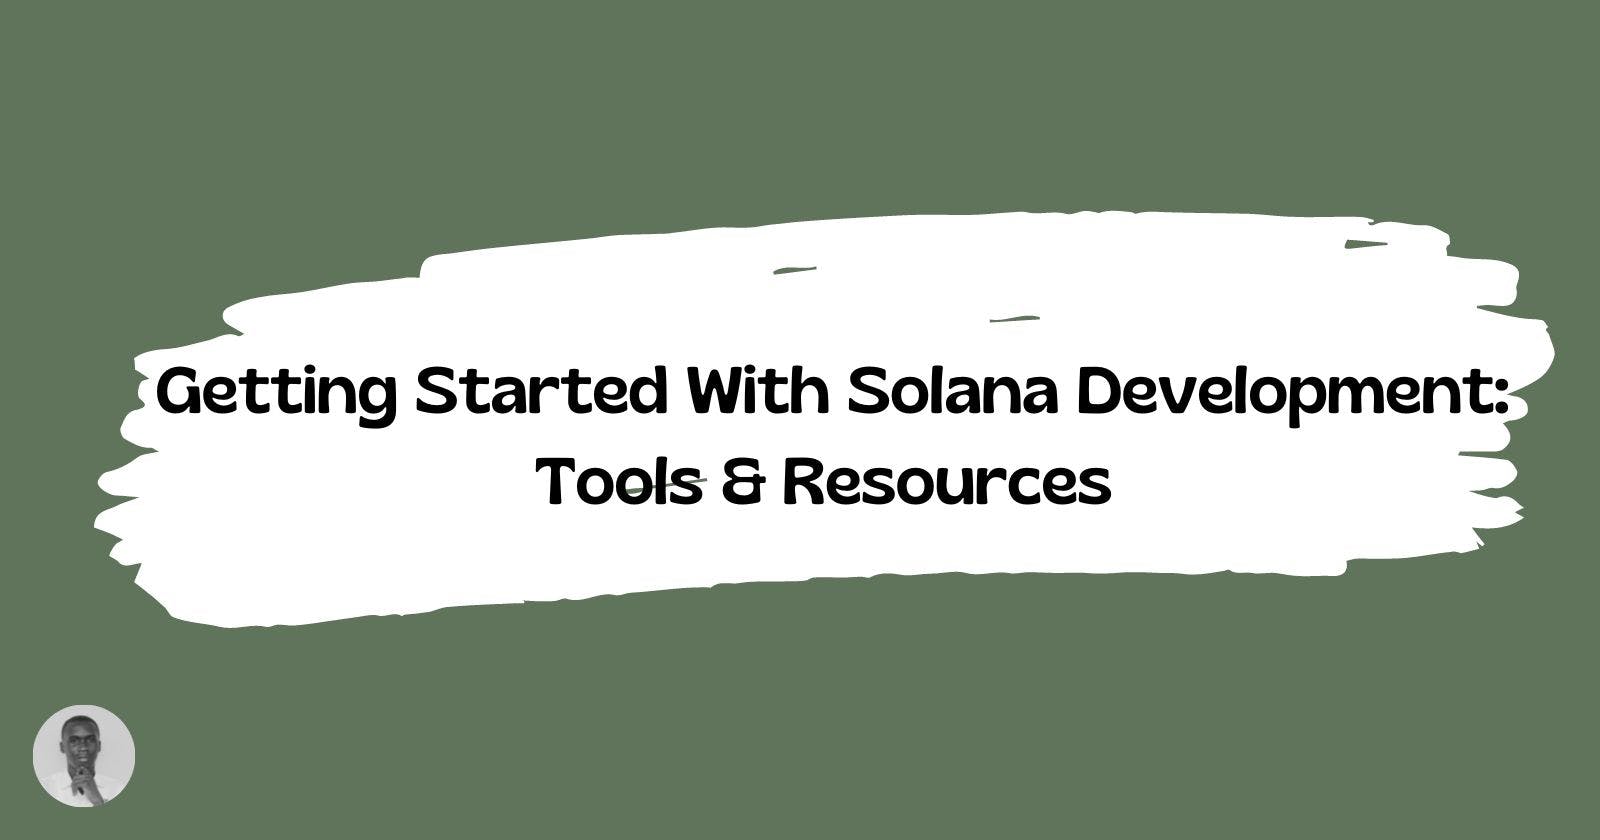 Getting Started With Solana Development: Tools & Resources